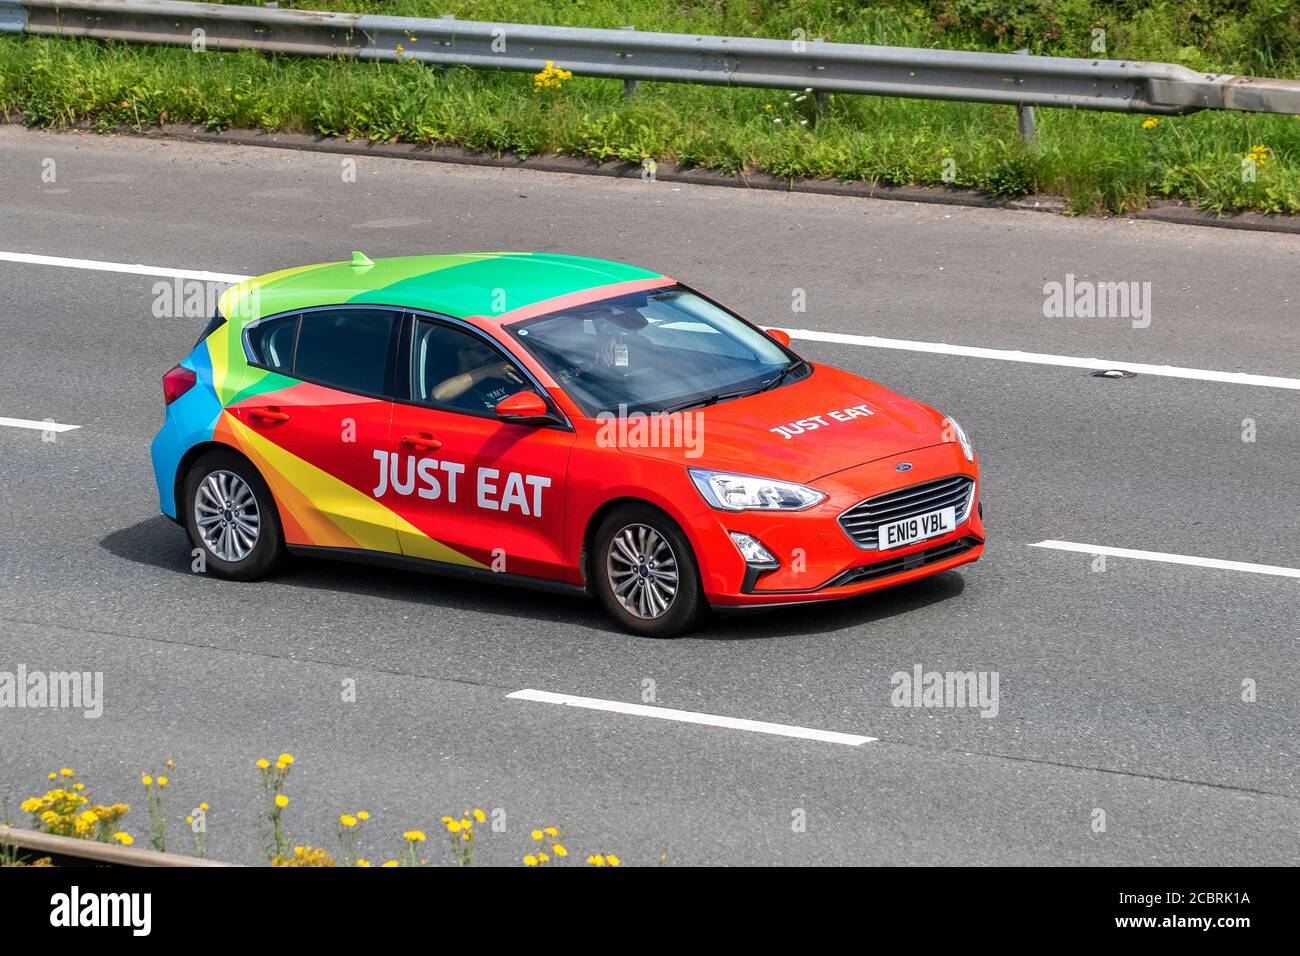 Just Eat online foods delivery 2019 Ford Focus Titanium TDCI ; Vehicular traffic moving vehicles, commercial vans, food courier on the Just Eat network, takeaway business vehicle, cars driving vehicle on UK roads, motors, motoring on the M6 motorway highway network. Stock Photo